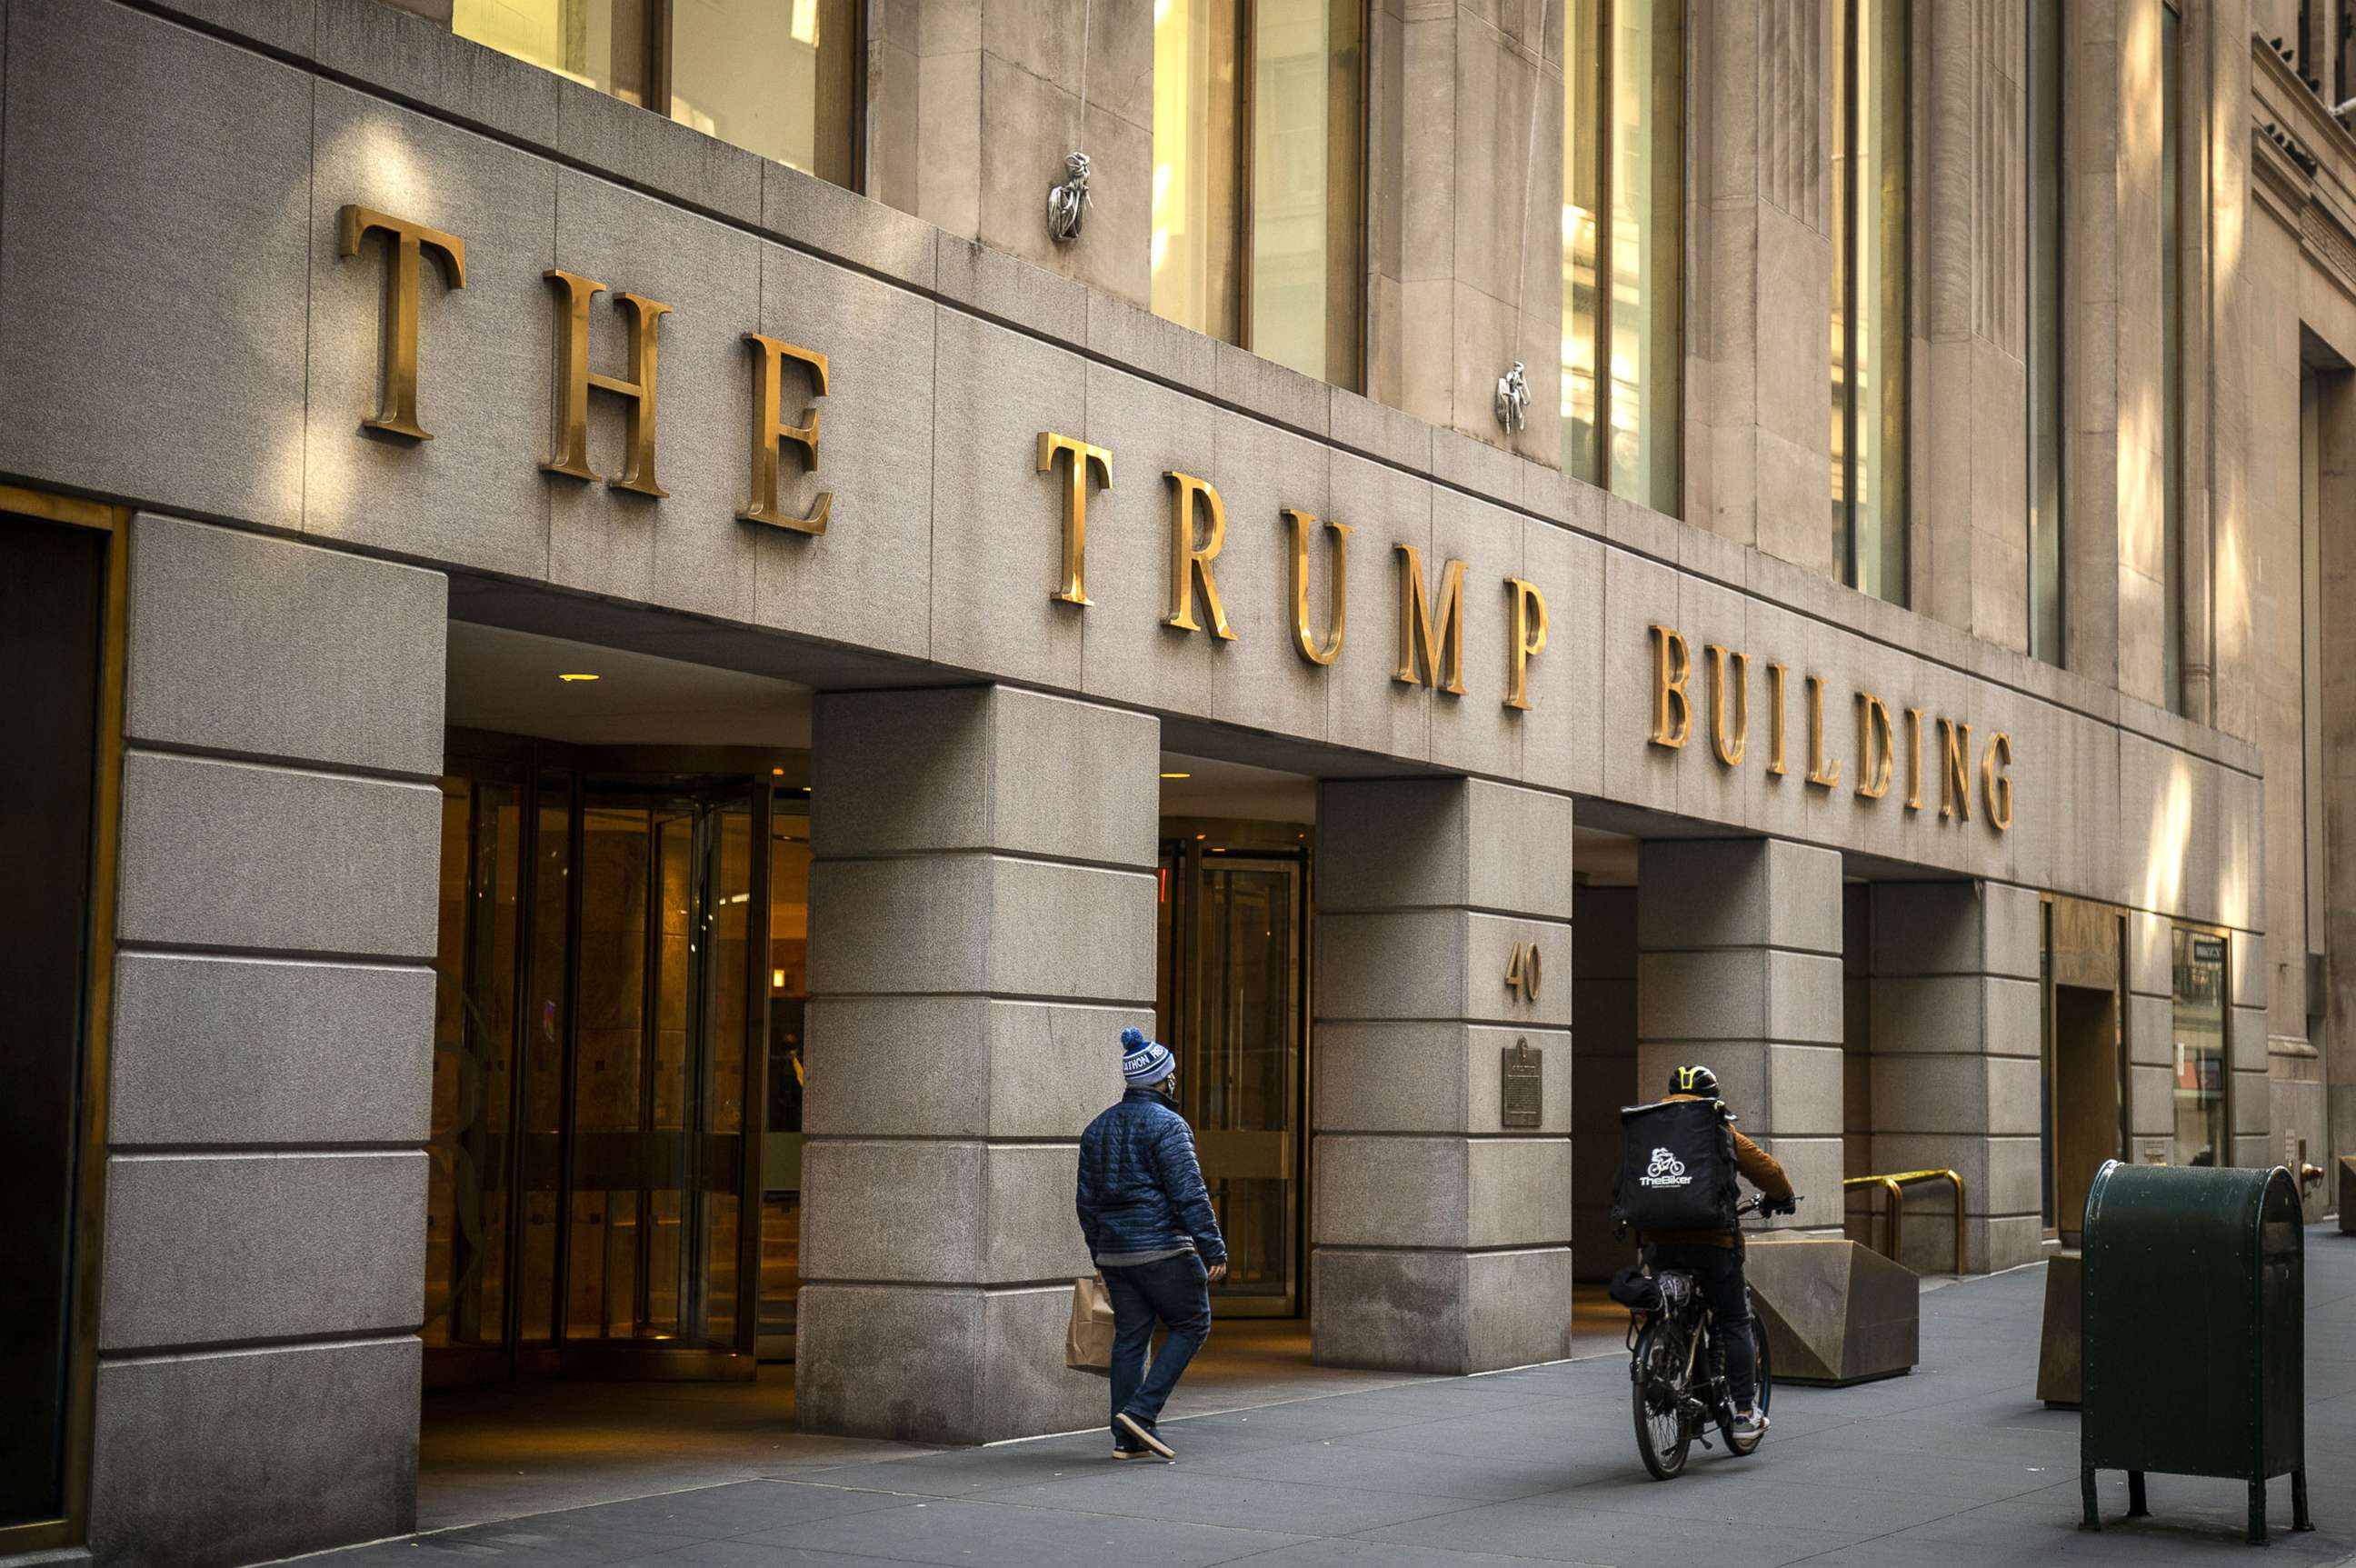 PHOTO: In this Jan. 24, 2021, file photo, a pedestrian walks past the Trump Building in New York.